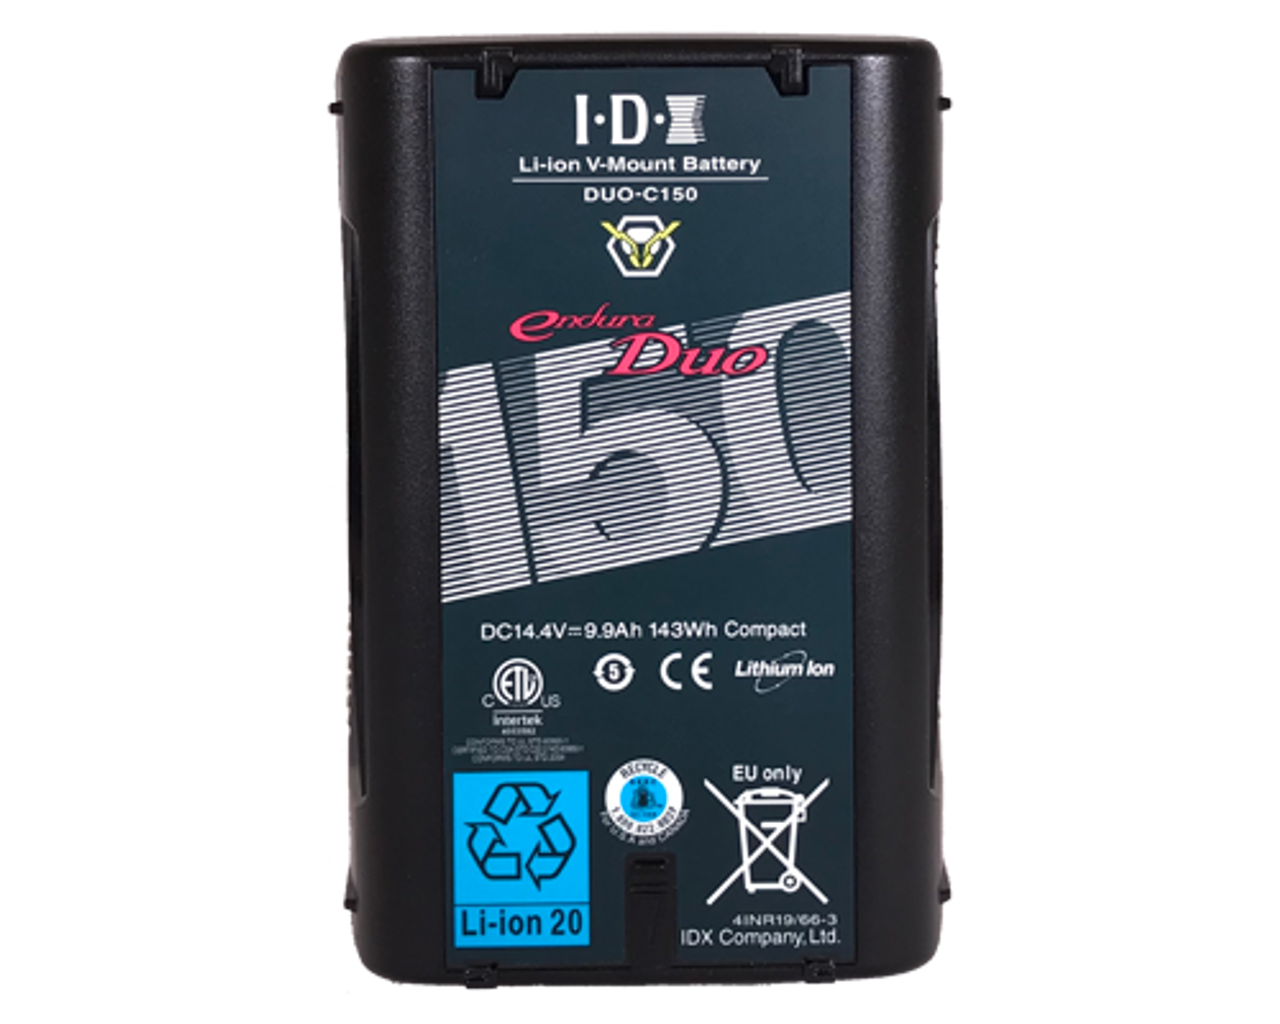 DUO-C150 (143Wh High-Load Li-Ion V-Mount Battery w 2x D-Tap and USB)